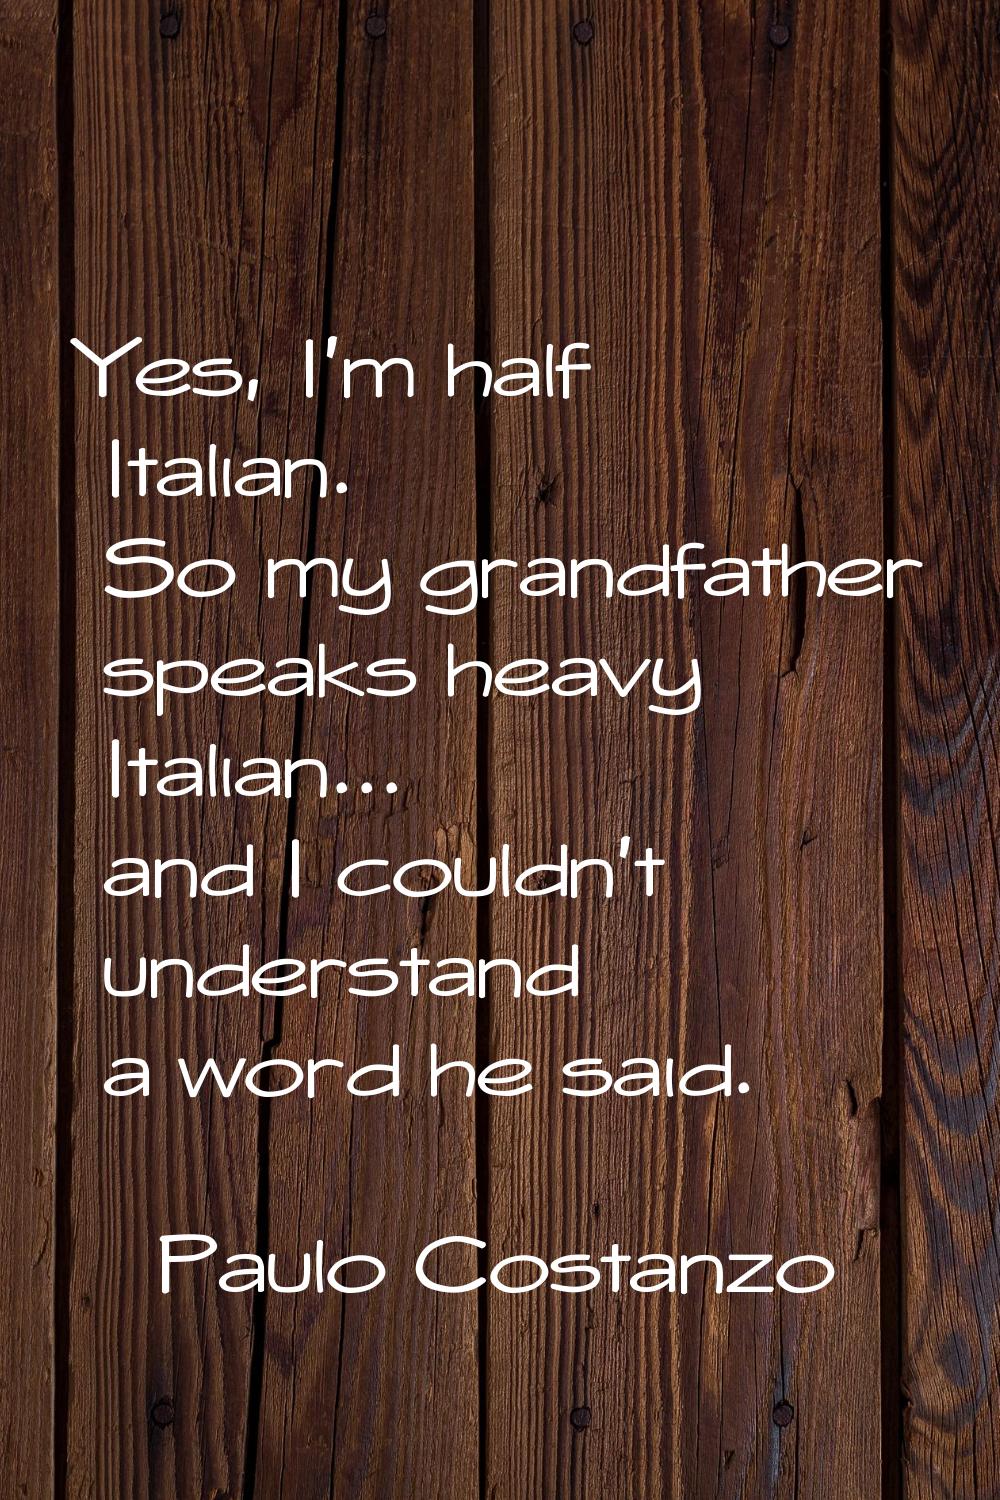 Yes, I'm half Italian. So my grandfather speaks heavy Italian... and I couldn't understand a word h